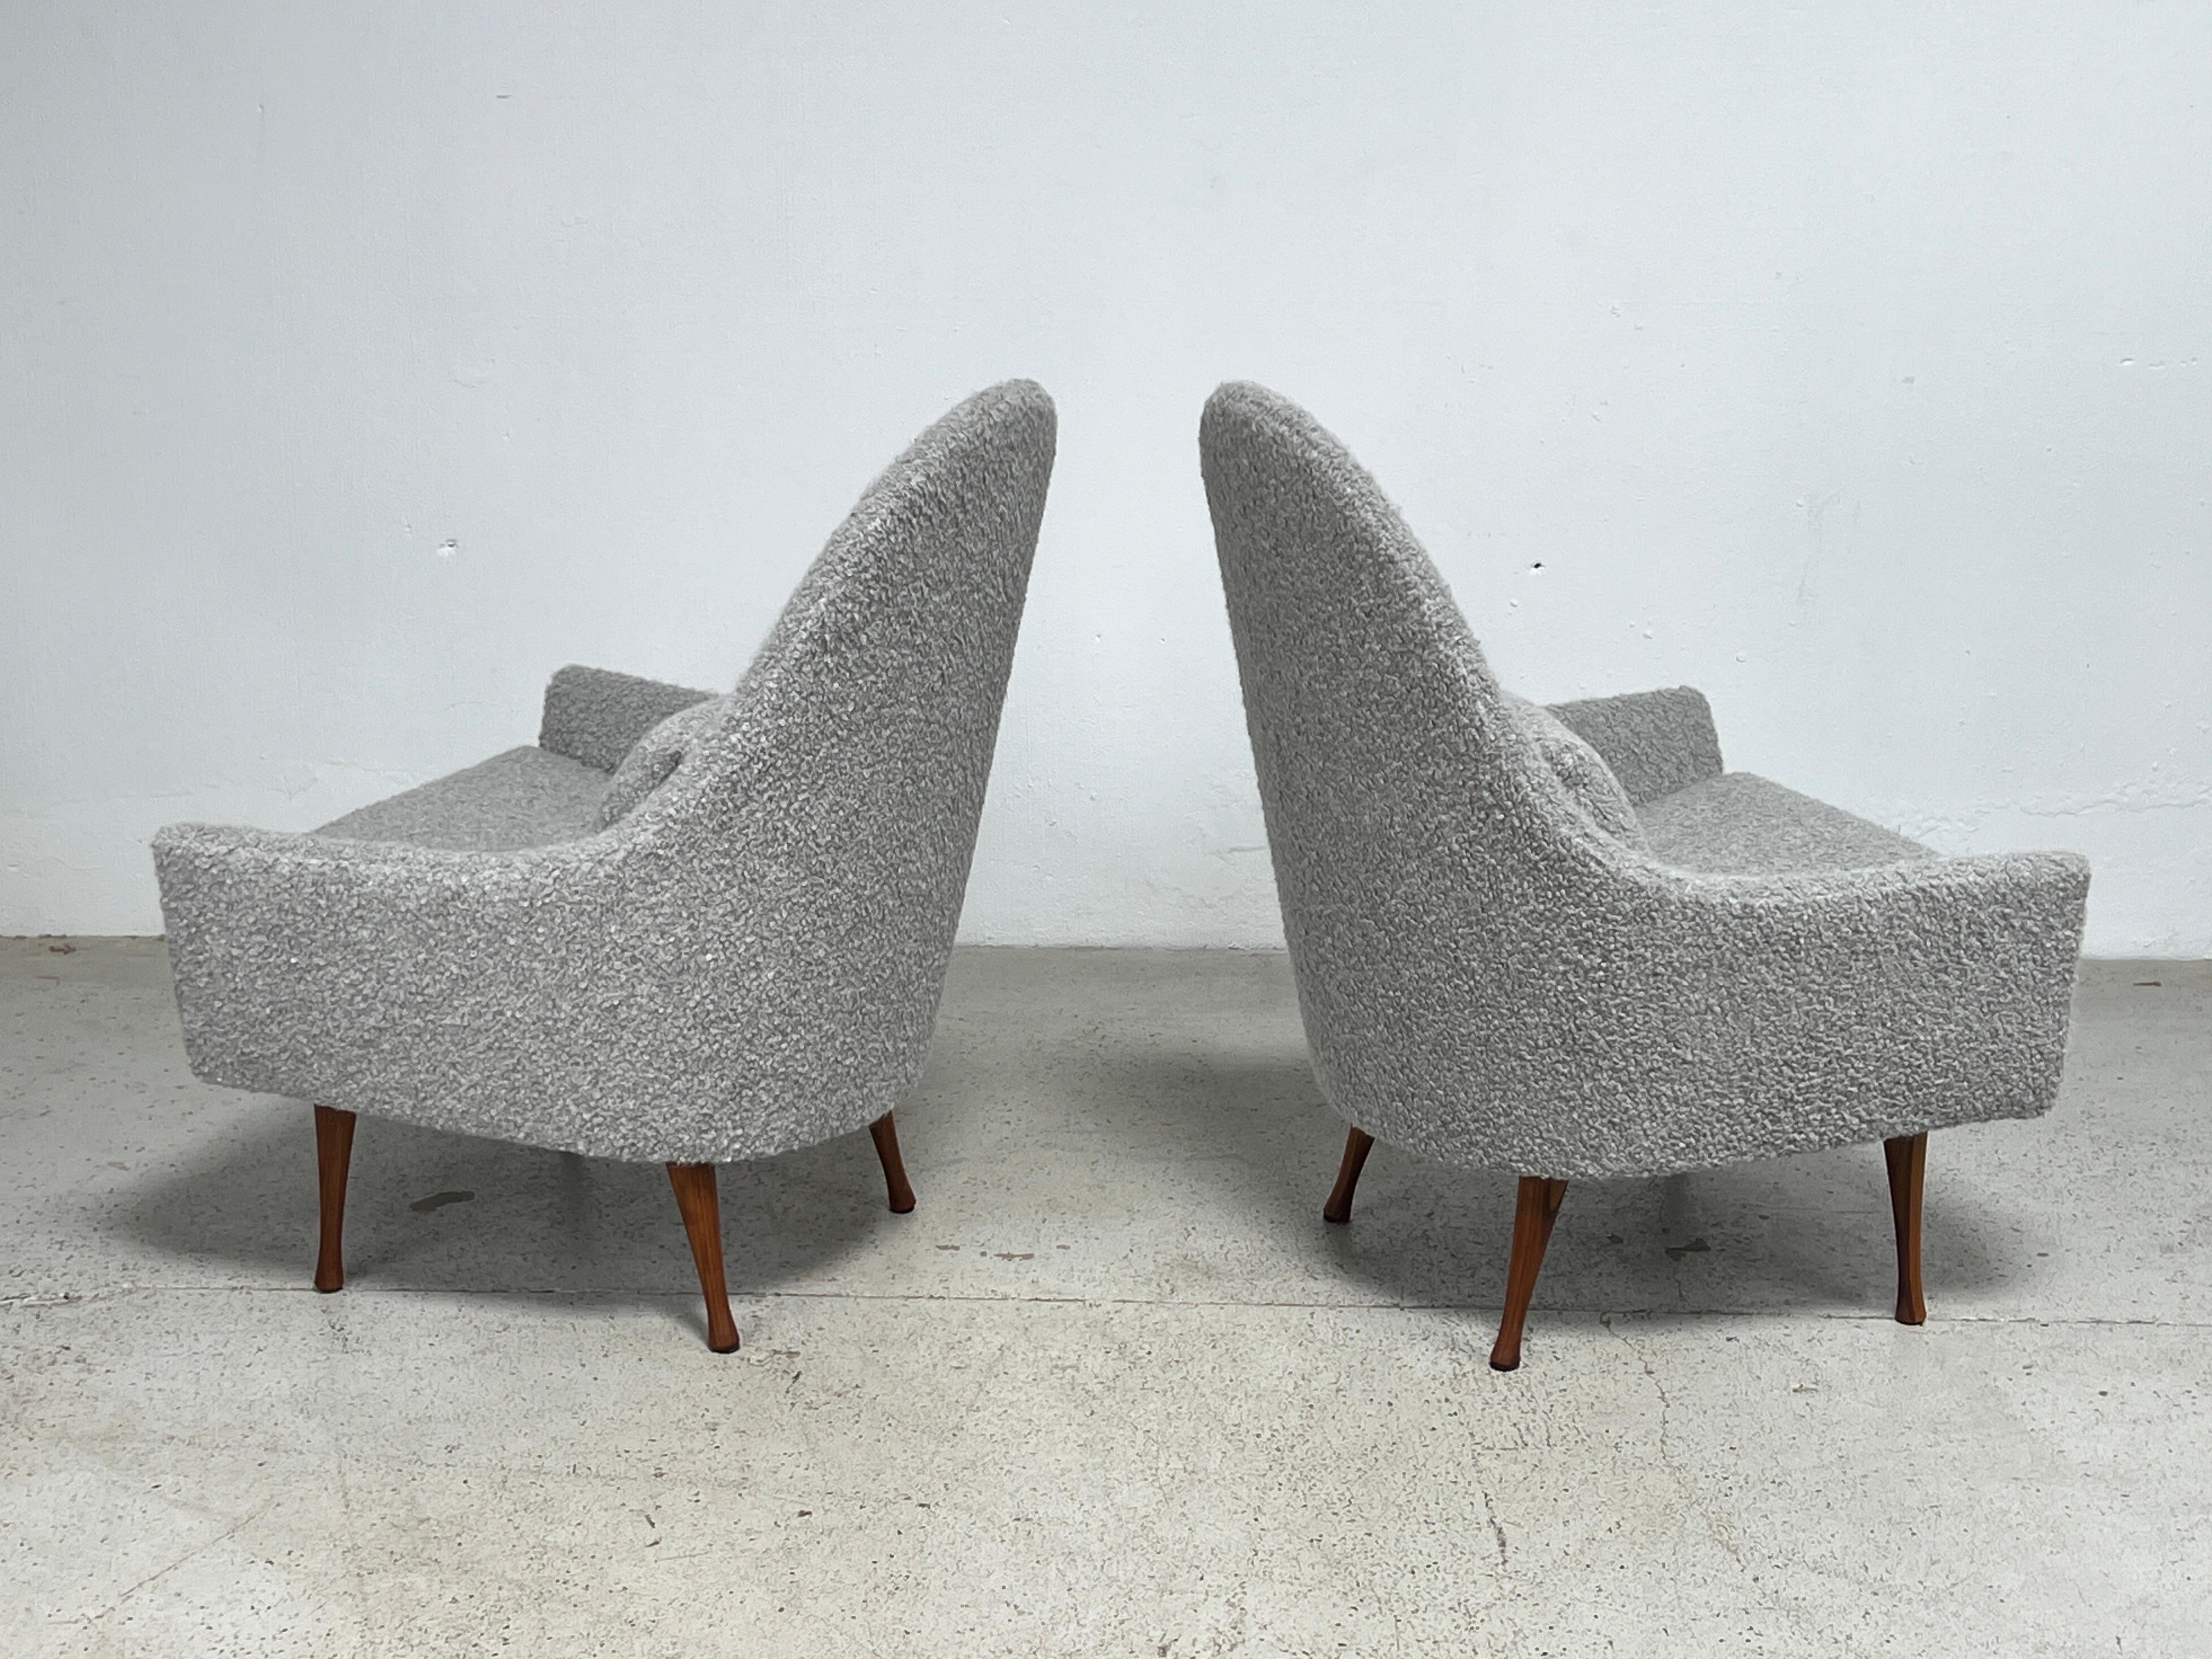 Pair of Lounge chairs by Paul McCobb for Widdicomb  For Sale 4